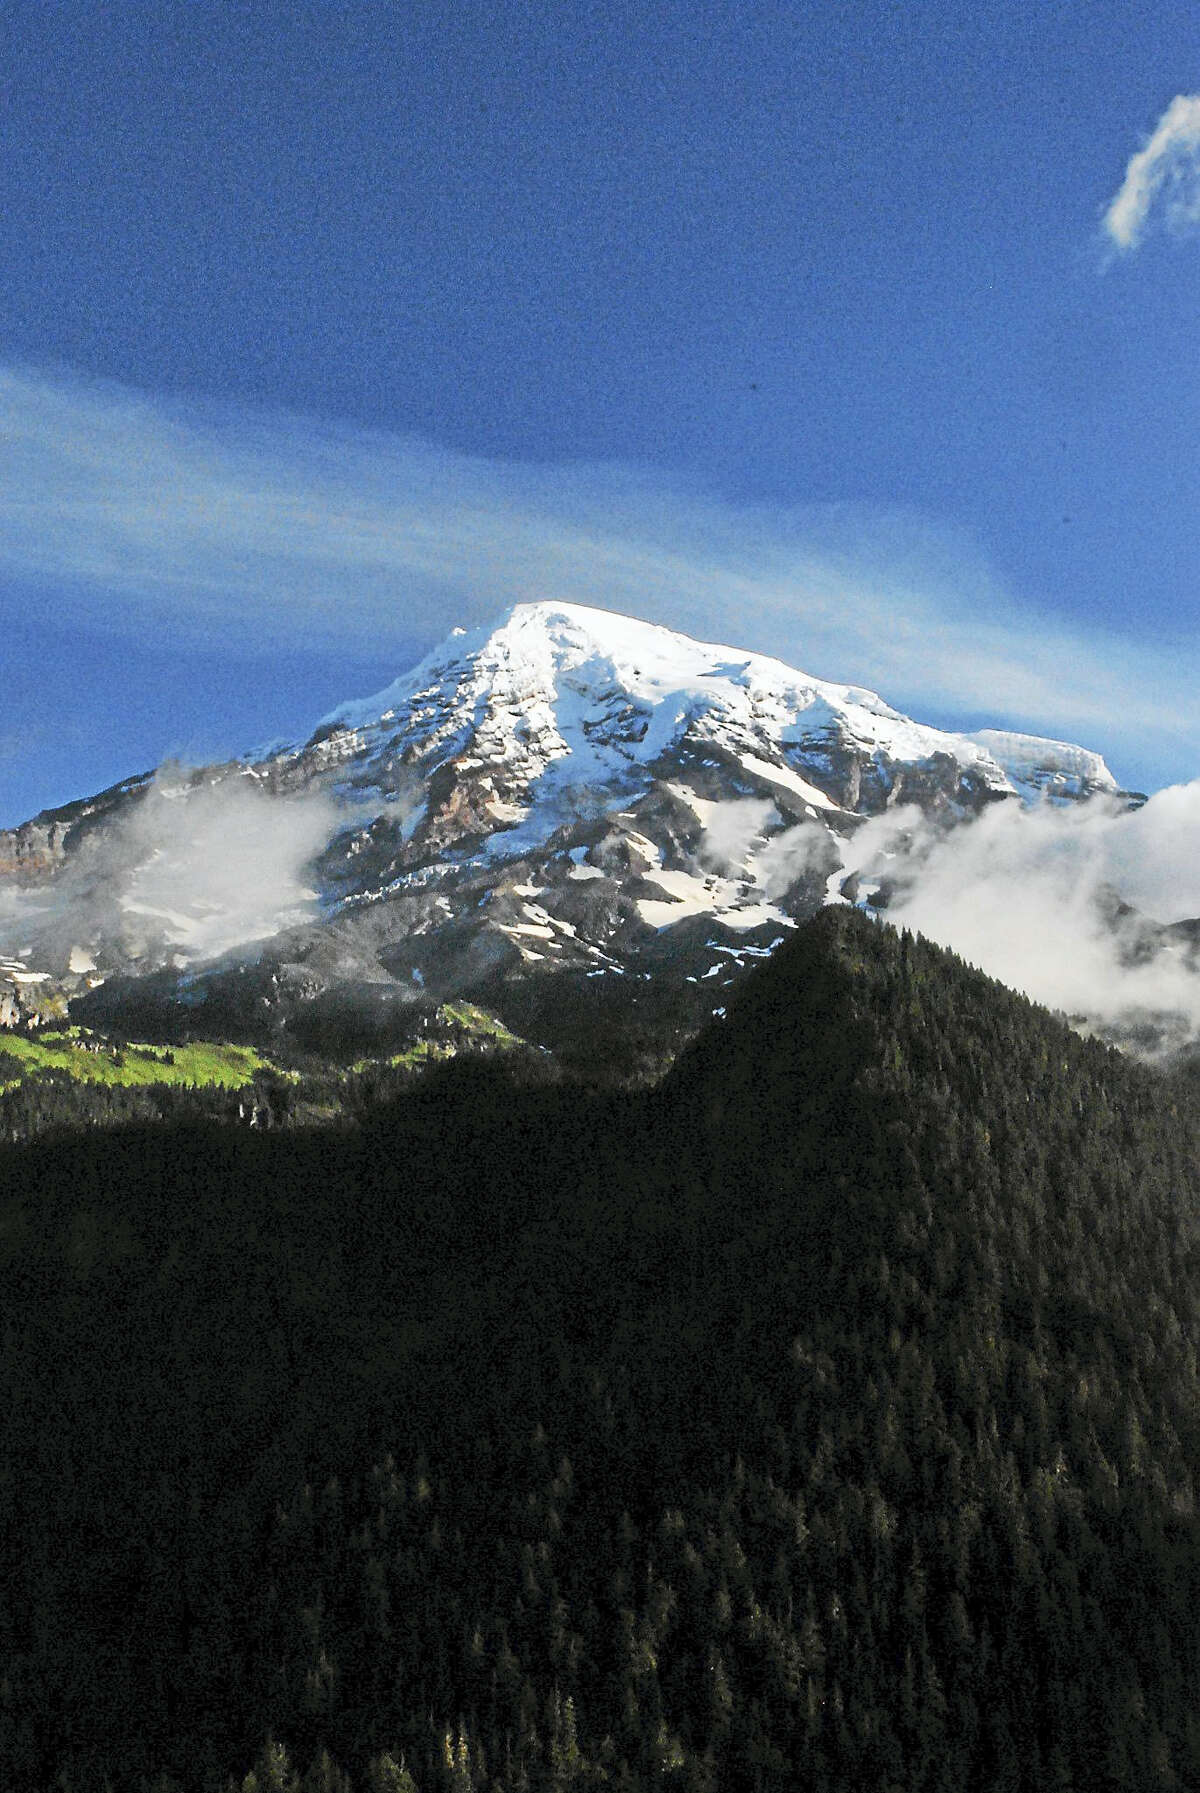 A view of Mt. Rainier just outside of Seattle, Washington. Mt. Rainier National Park is home to Mt. Rainier, an active volcano reaching 14,410 feet above sea level. (Anna Bisaro - New Haven Register)